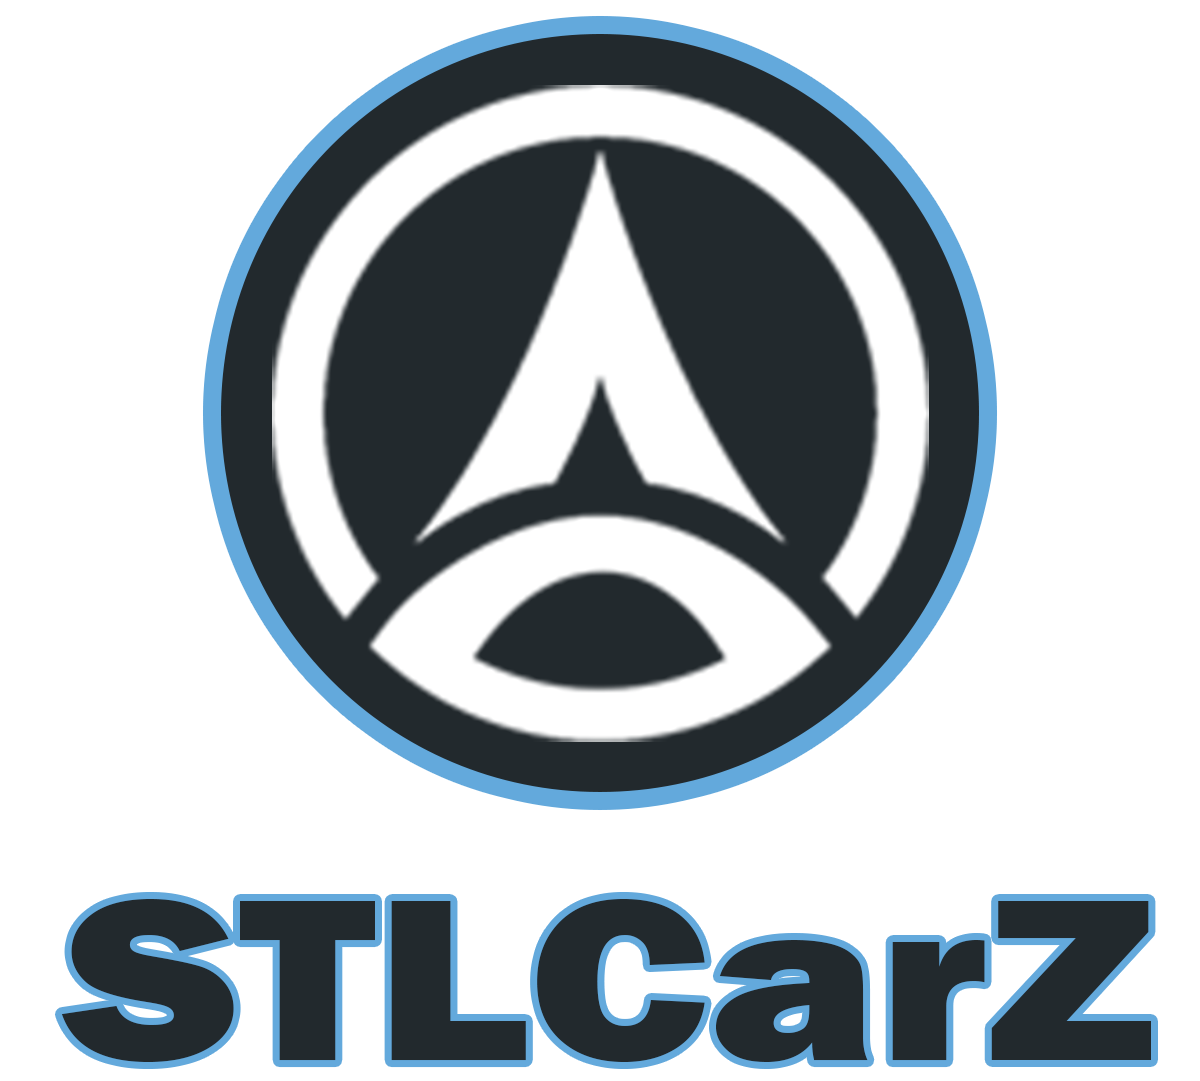 STLCarZ - Your #1 Source for quality Pre-Owned vehicles